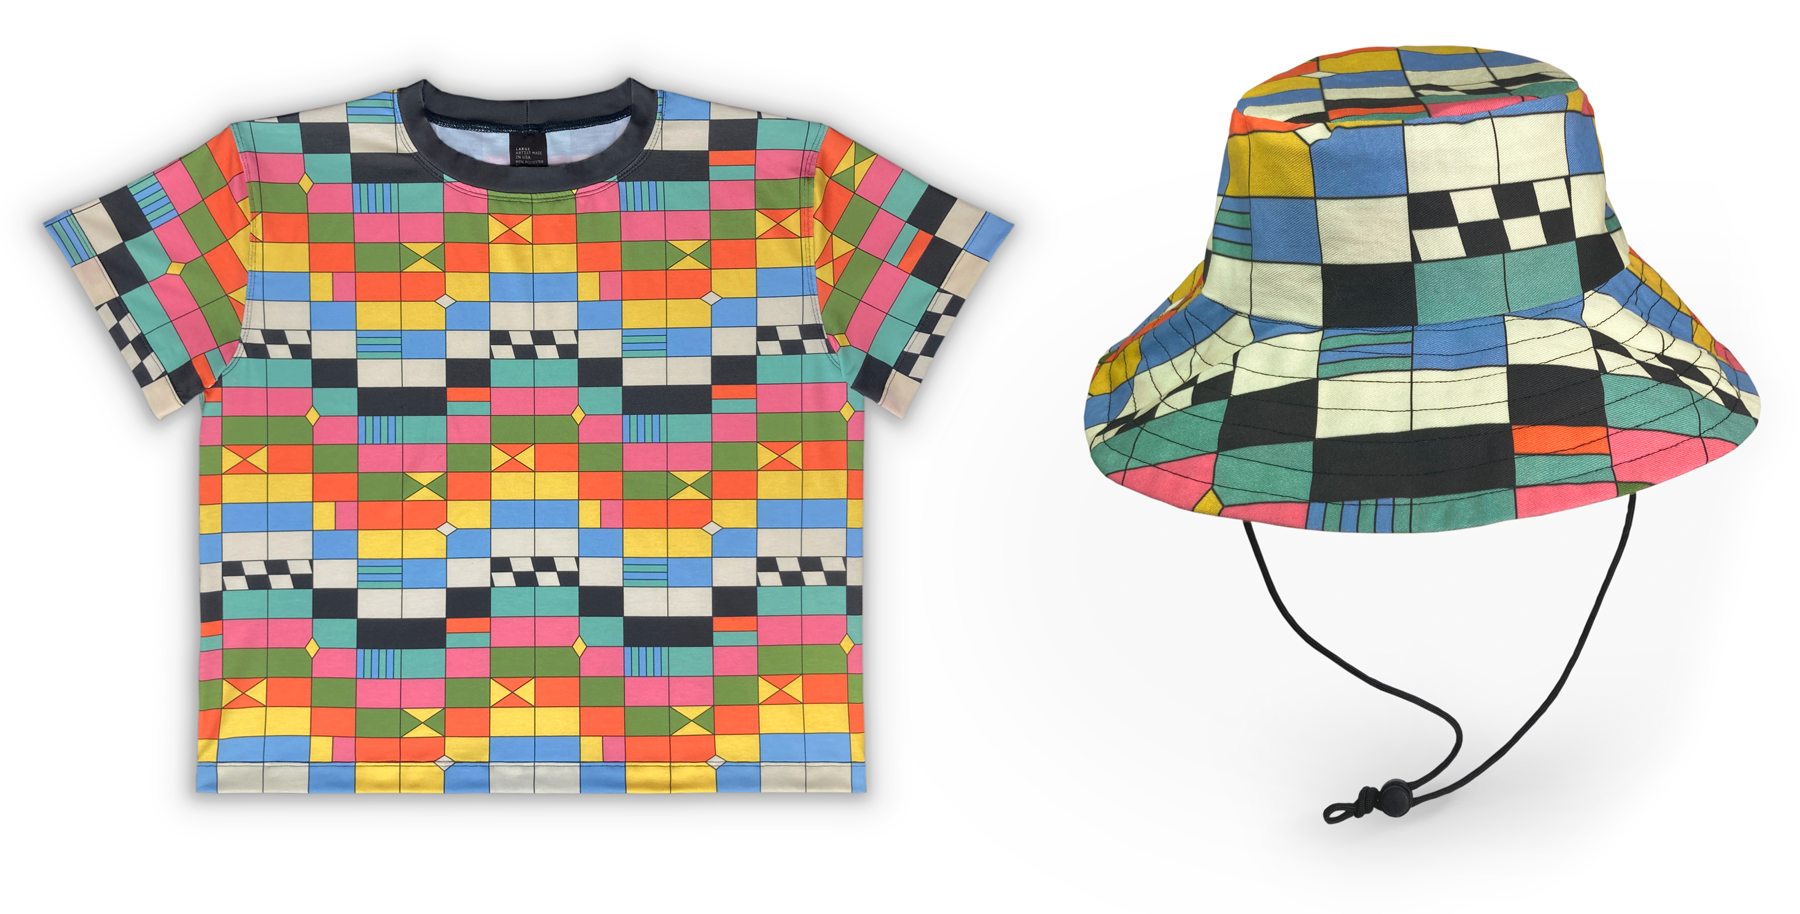 TV Test Pattern print on t-shirt and bucket hat- mid-century wave tile pattern with inset checkerboards, flying geese, stripes, and diamonds in an off-white, charcoal black, periwinkle blue, robin's egg blue, dusty rose, soft avocado green, soft orange, and mustard yellow.